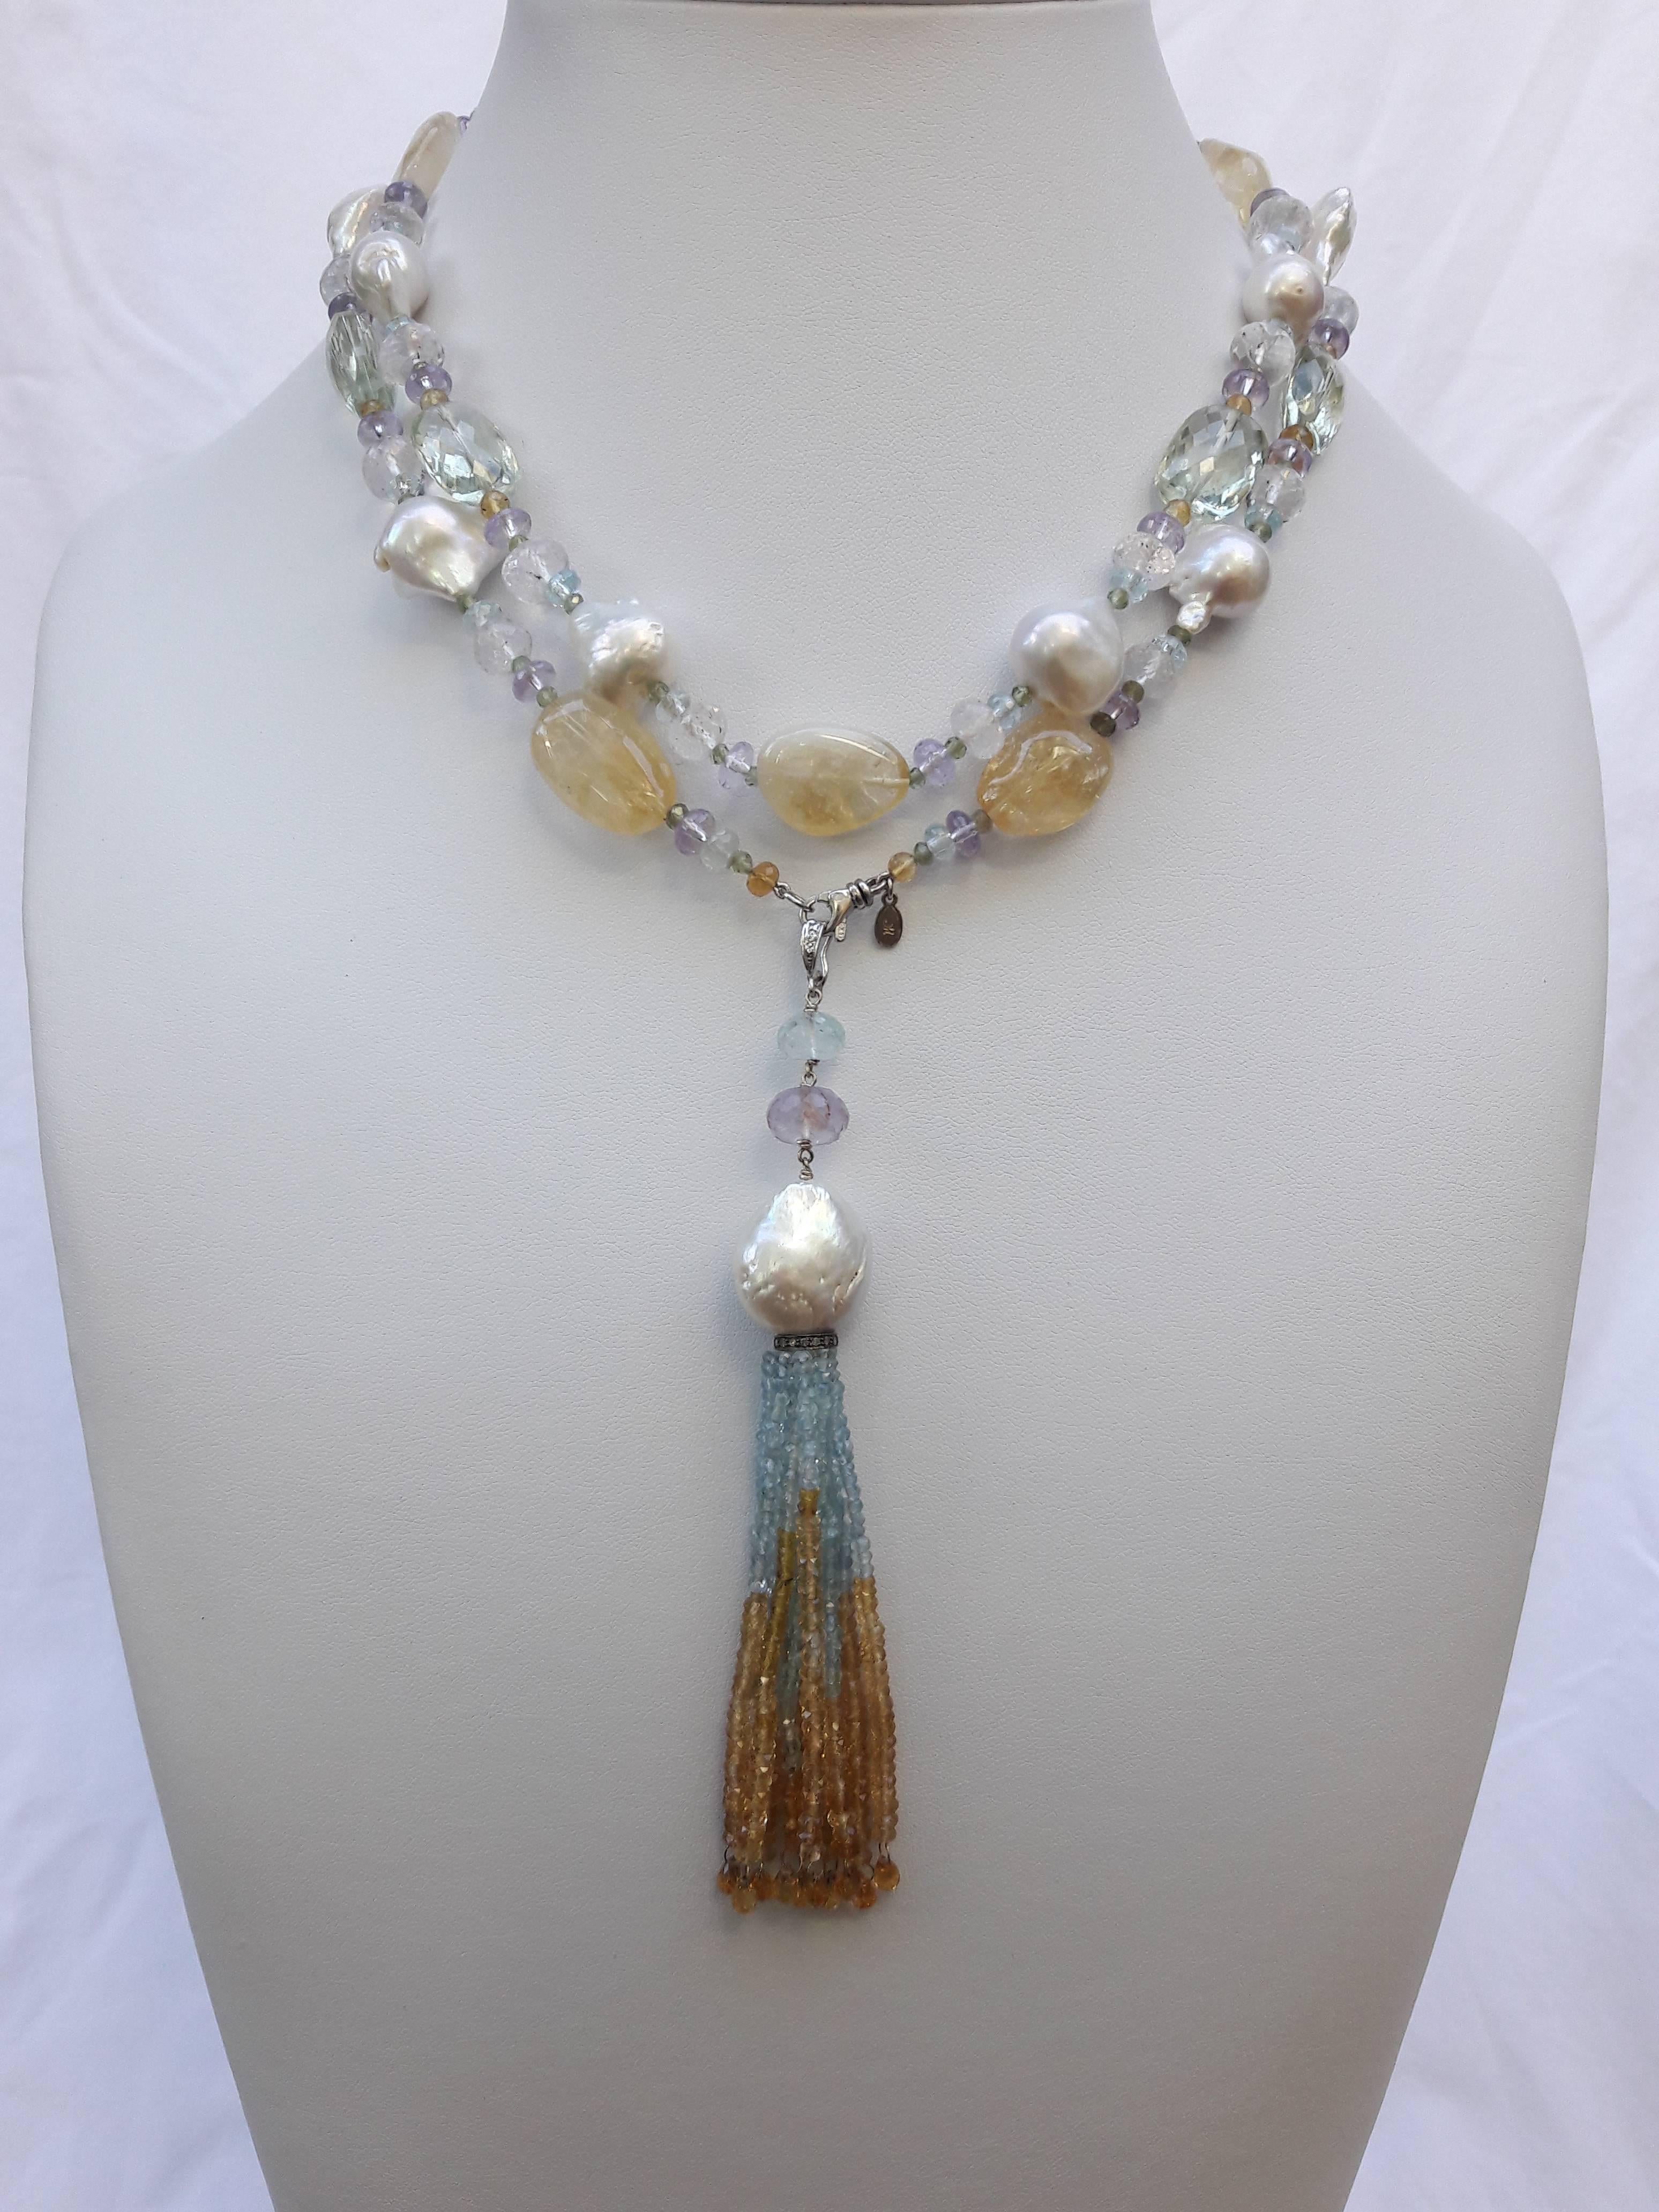 Baroque pearls are paired with Amethyst, Citrine, Aquamarine, Green Garnet, Fluorite, and Rose Quartz faceted beads (of various shapes and sizes) to create a gorgeous and shimmering piece. The semiprecious stones highlight the luster and iridescence